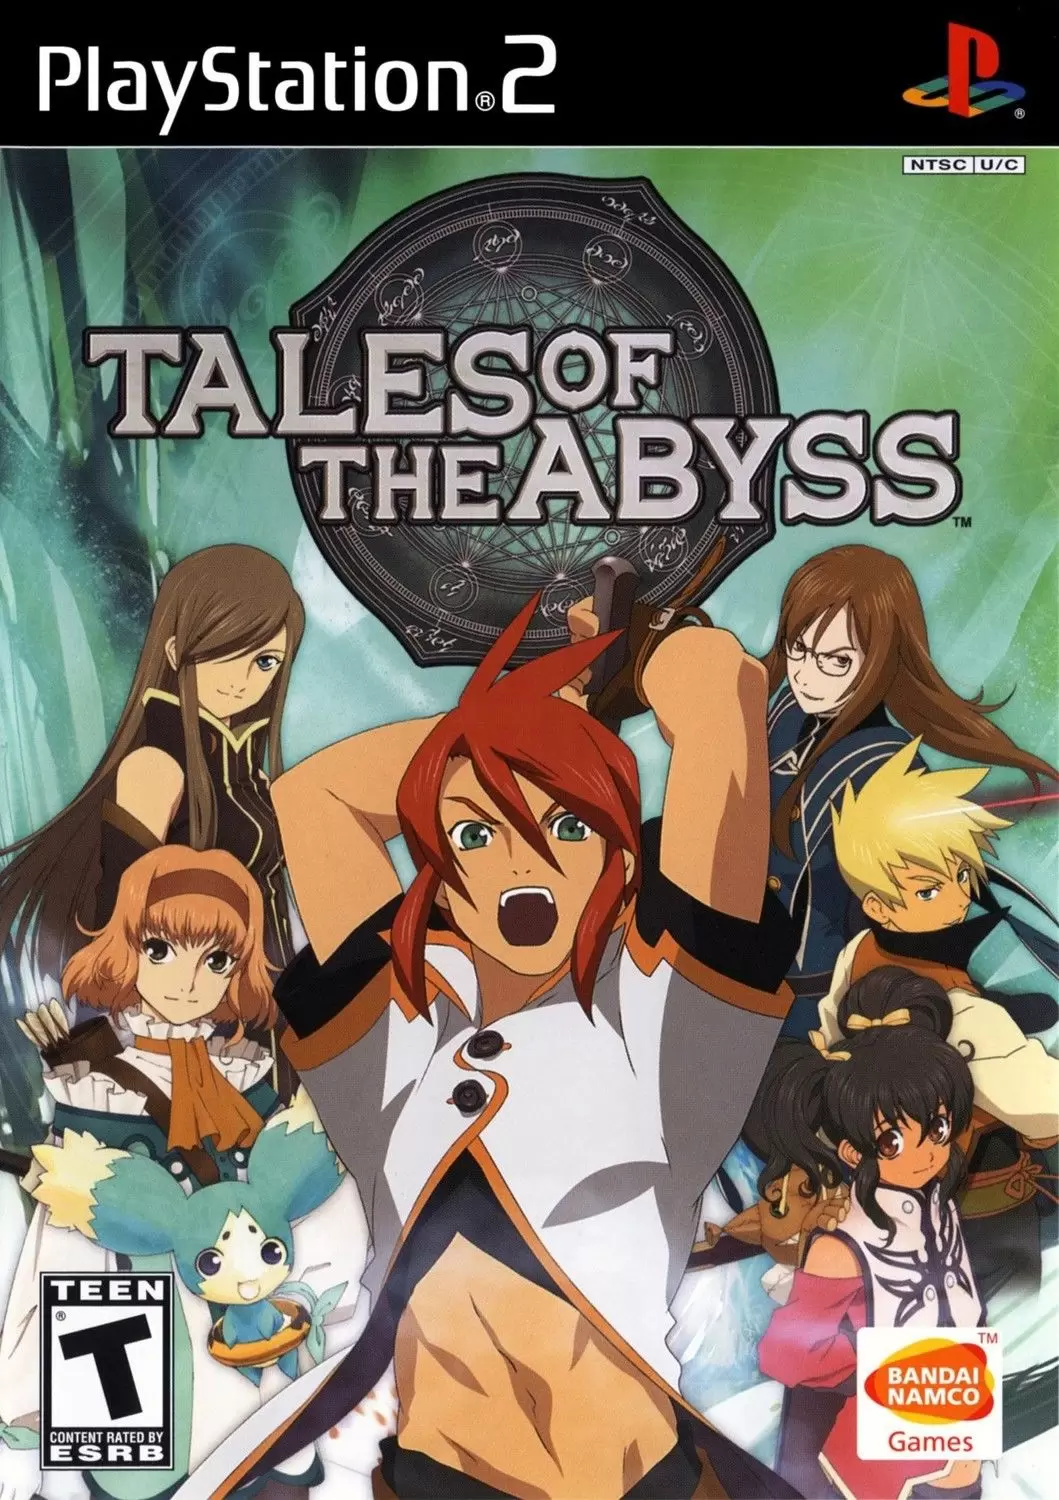 PS2 Games - Tales of the Abyss